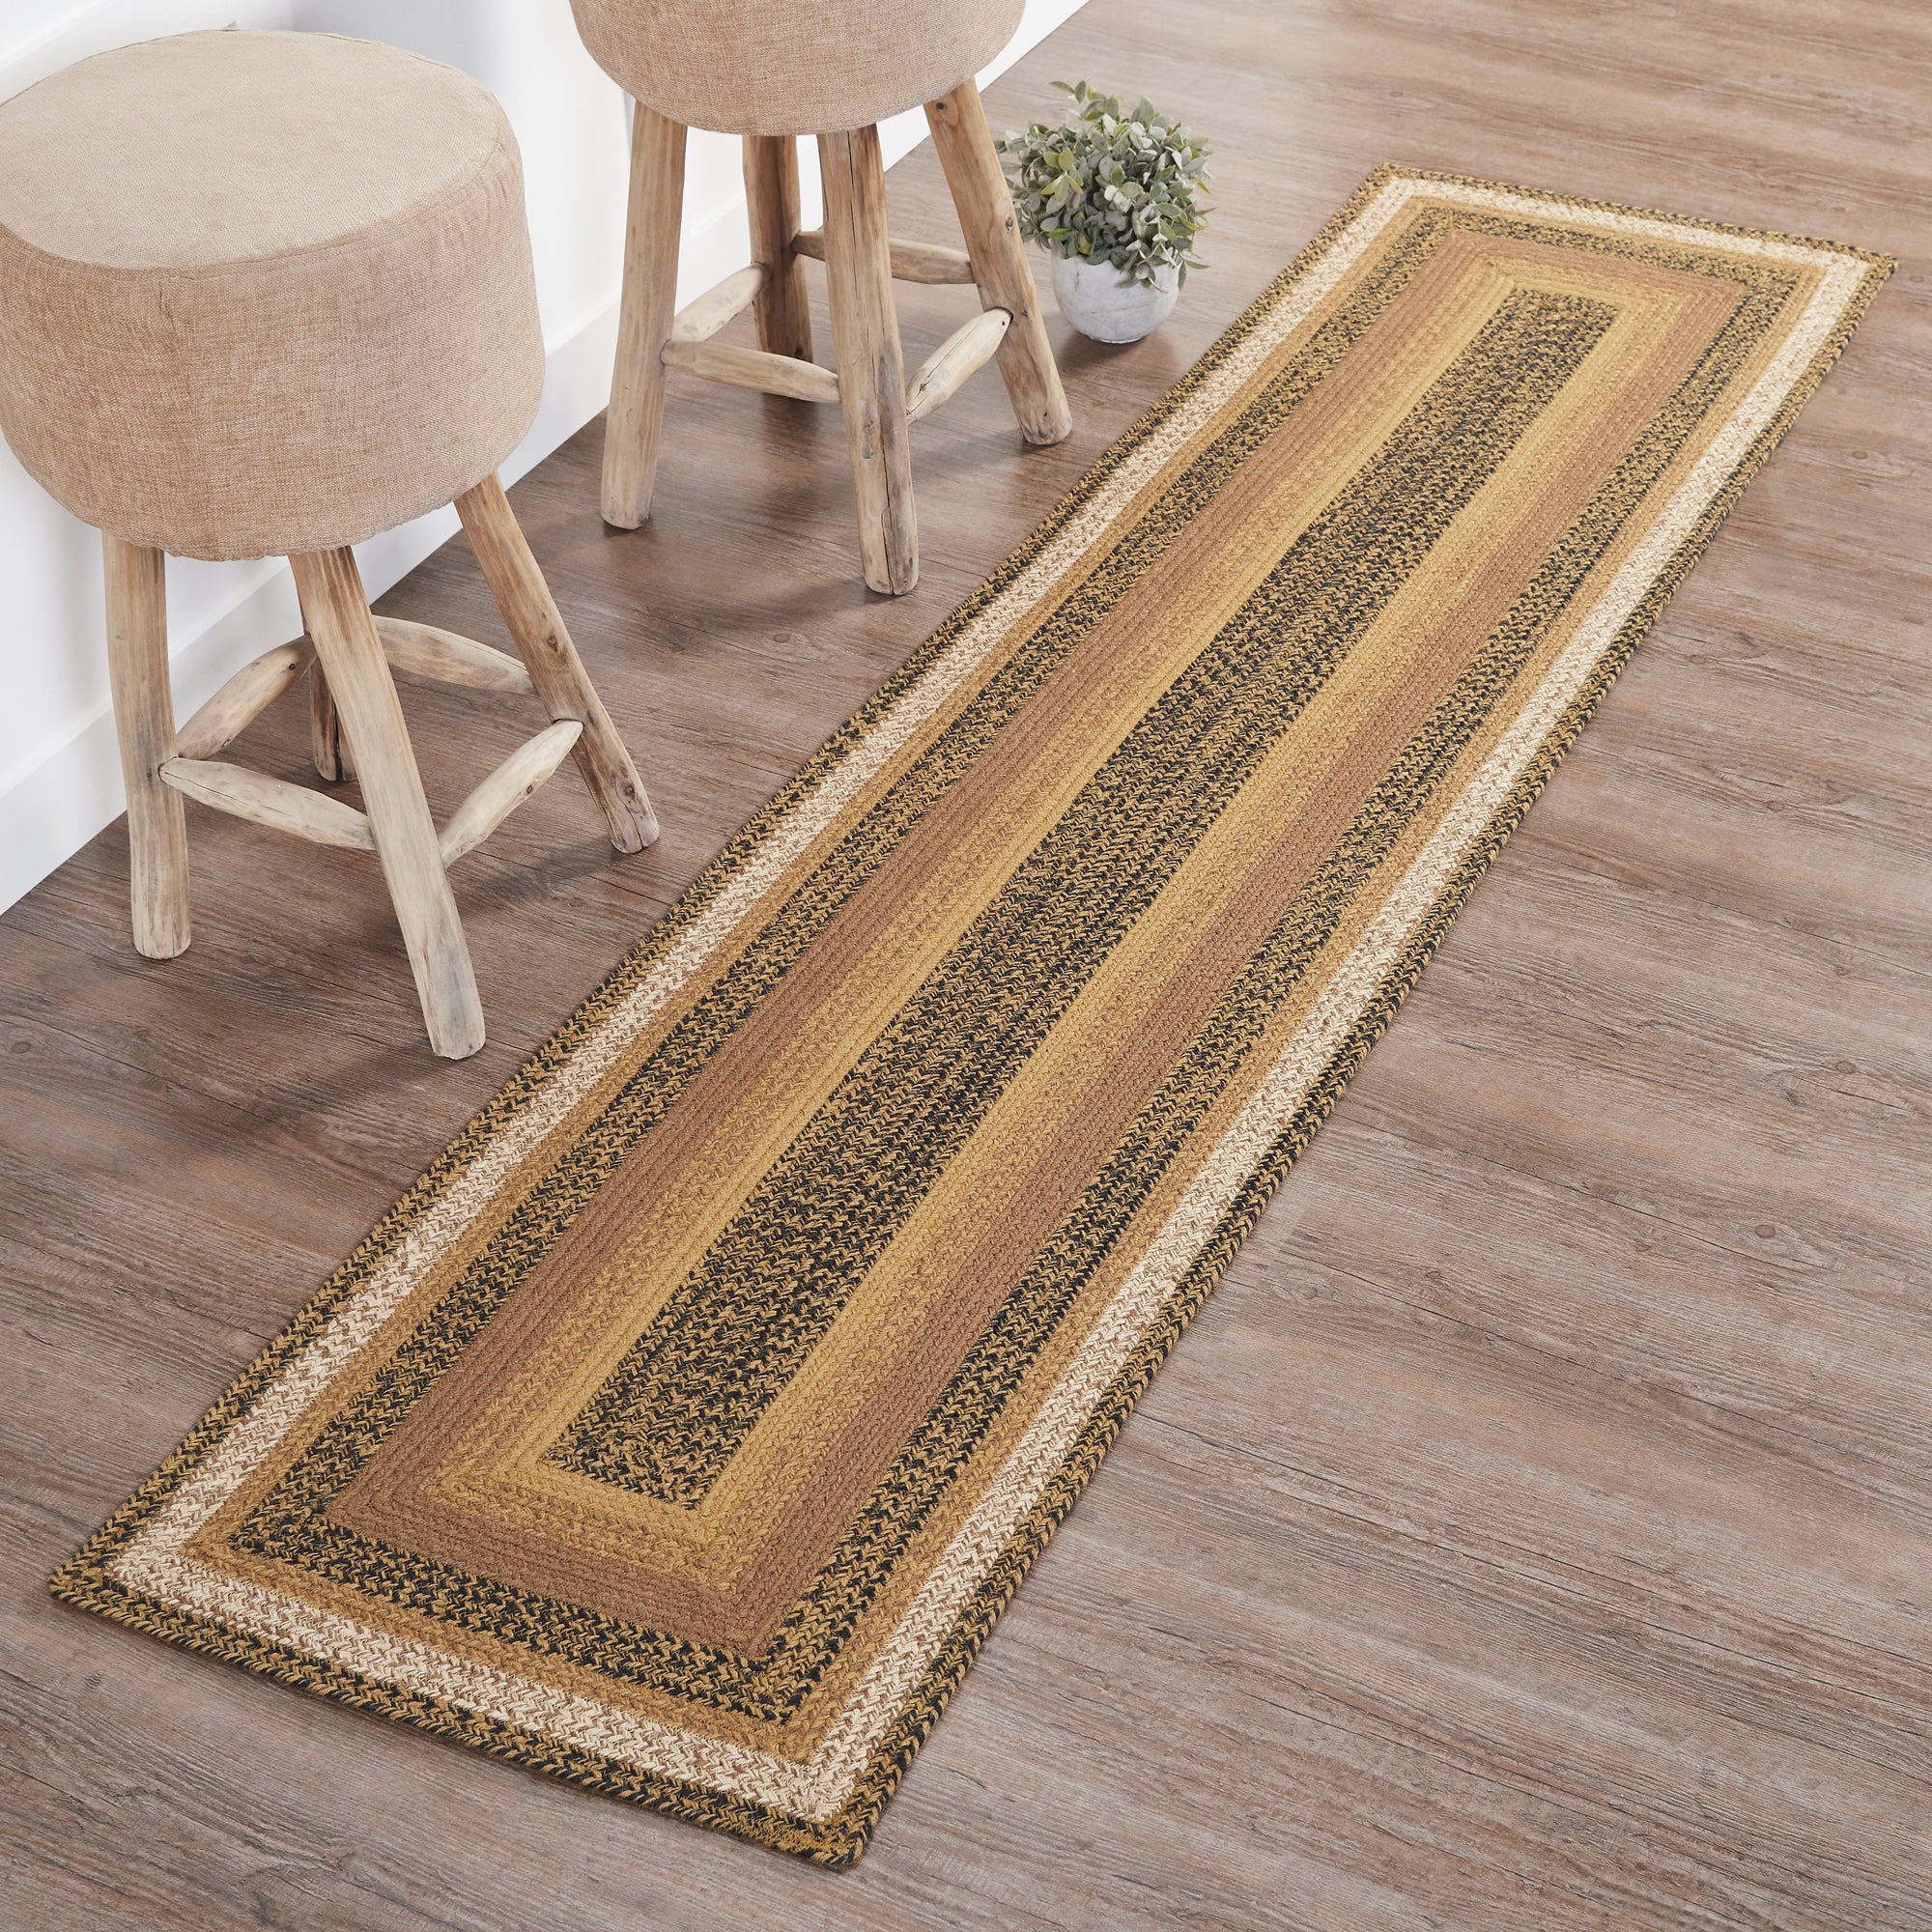 Kettle Grove Jute Braided Rug/Runner Rect. with Rug Pad 2'x8' VHC Brands